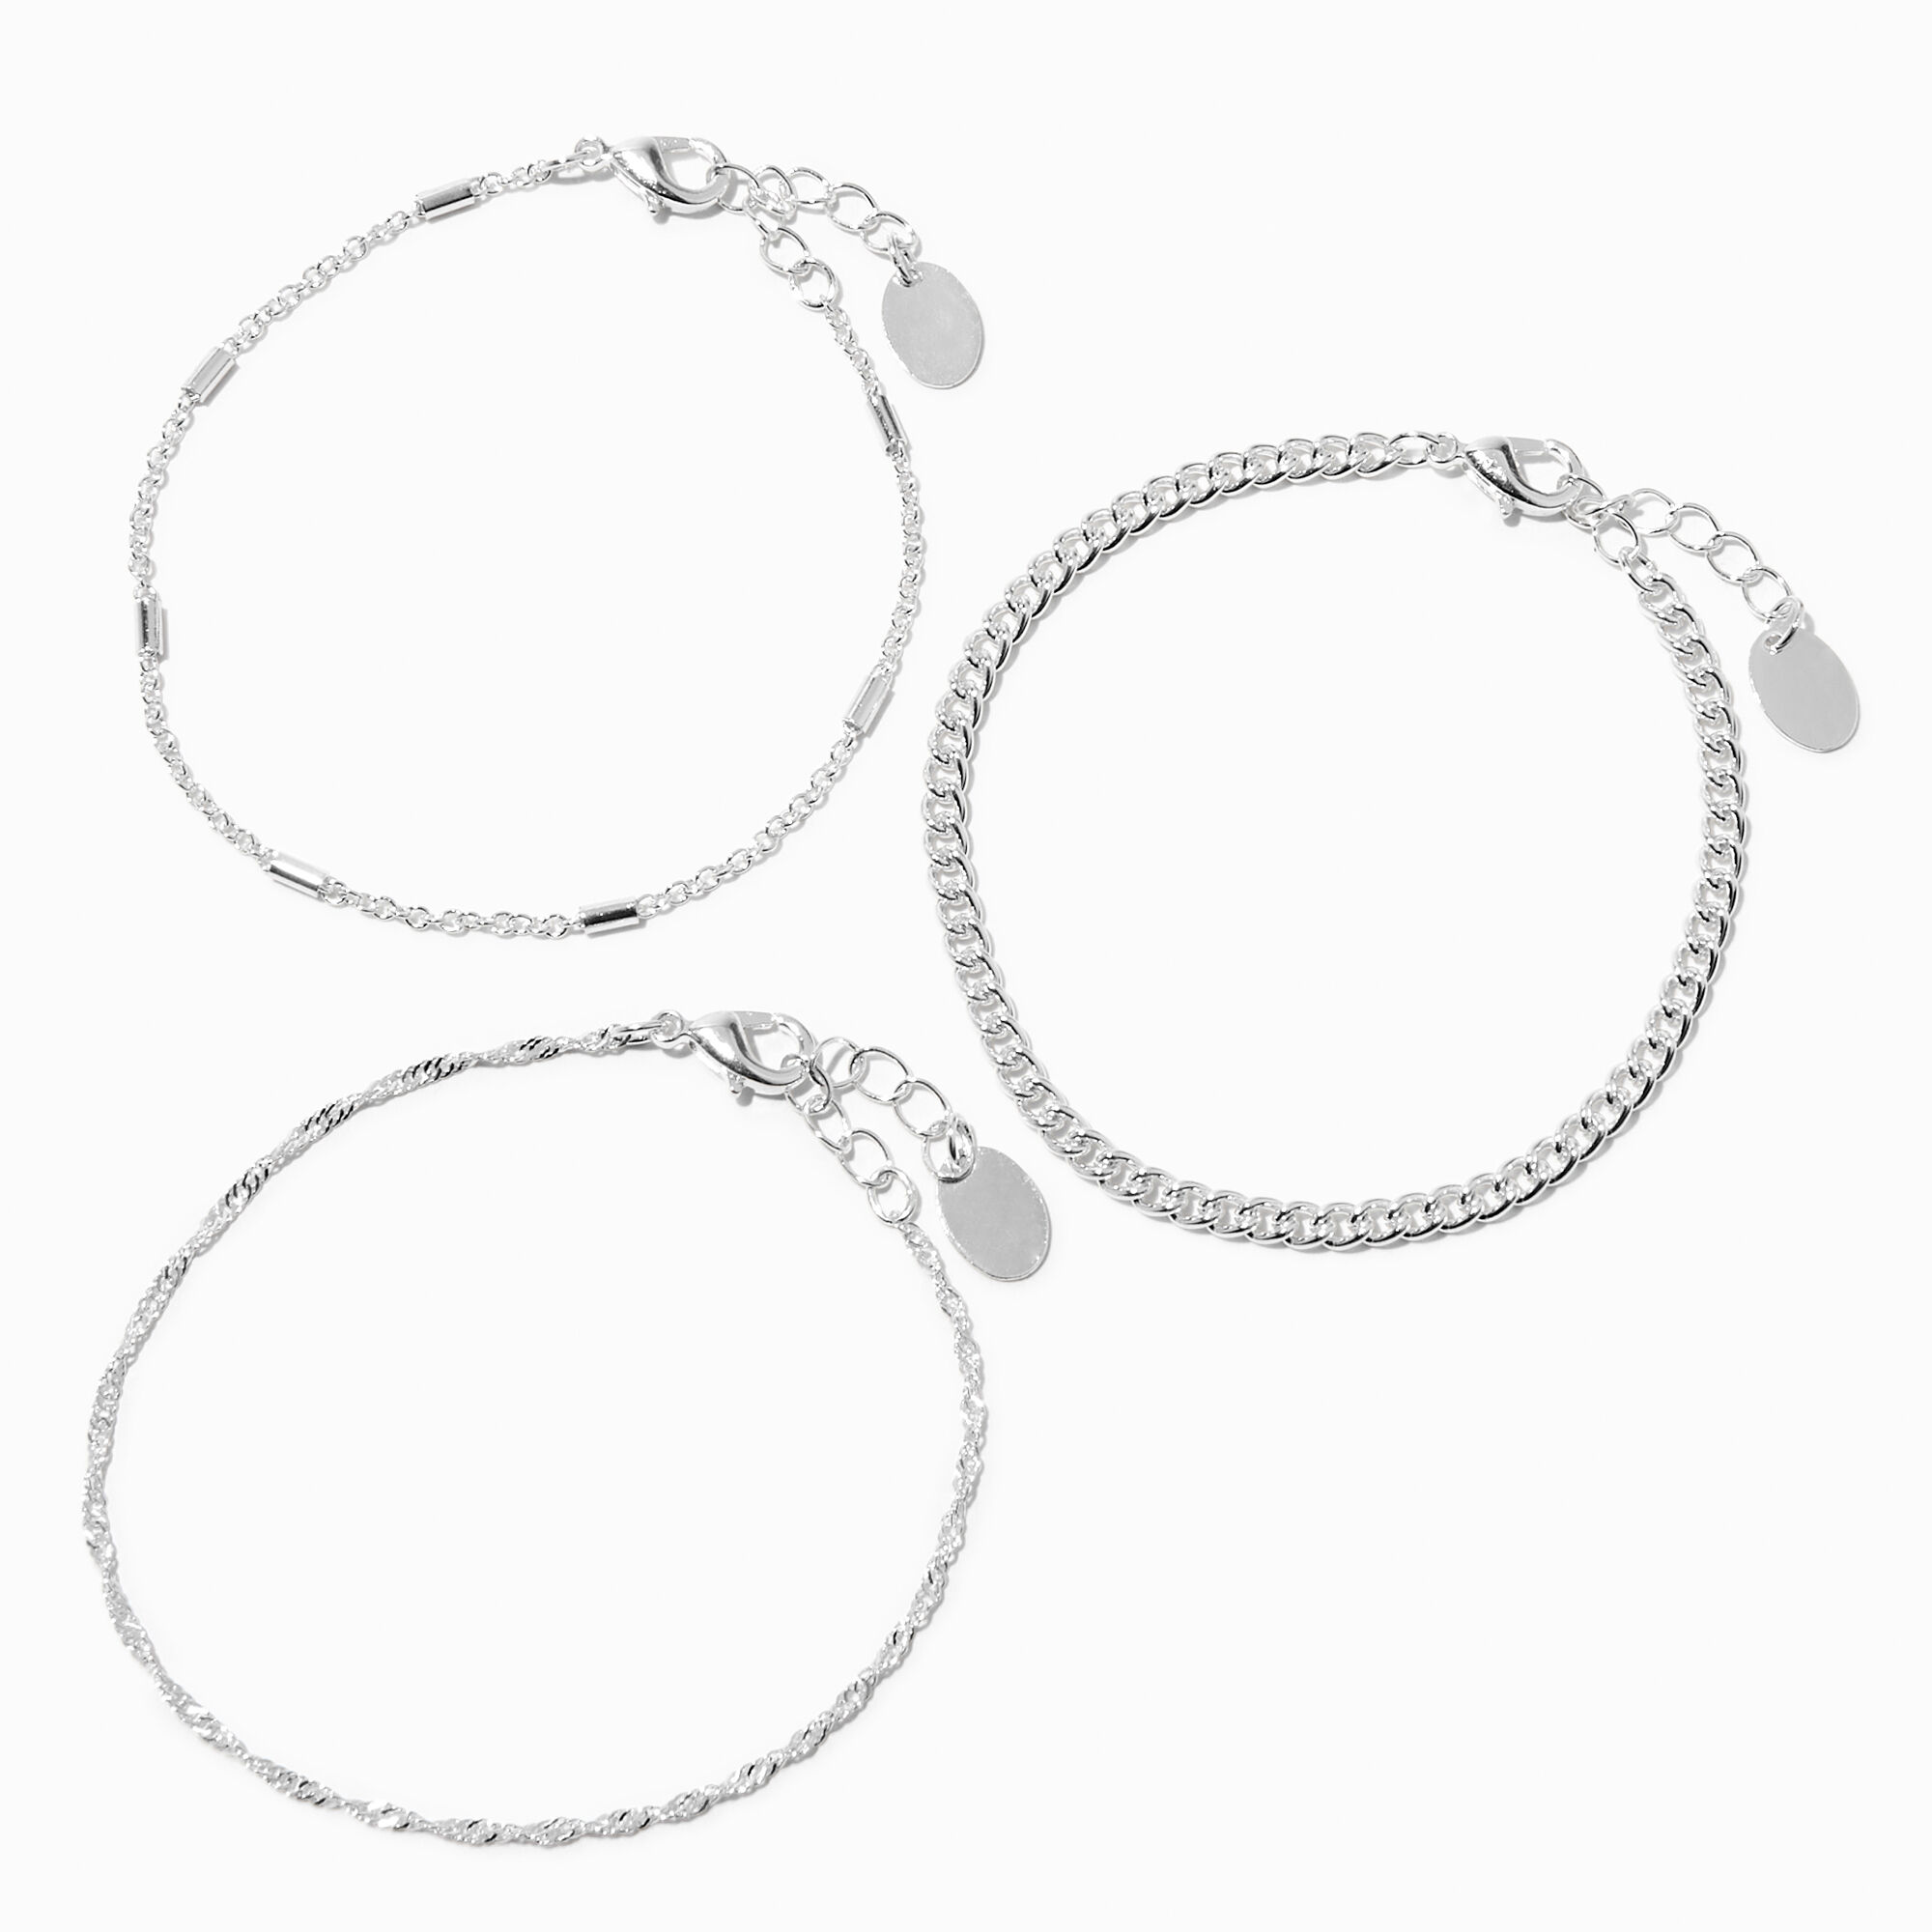 View Claires Recycled Jewelry Tone Mixed Chain Bracelets 3 Pack Silver information